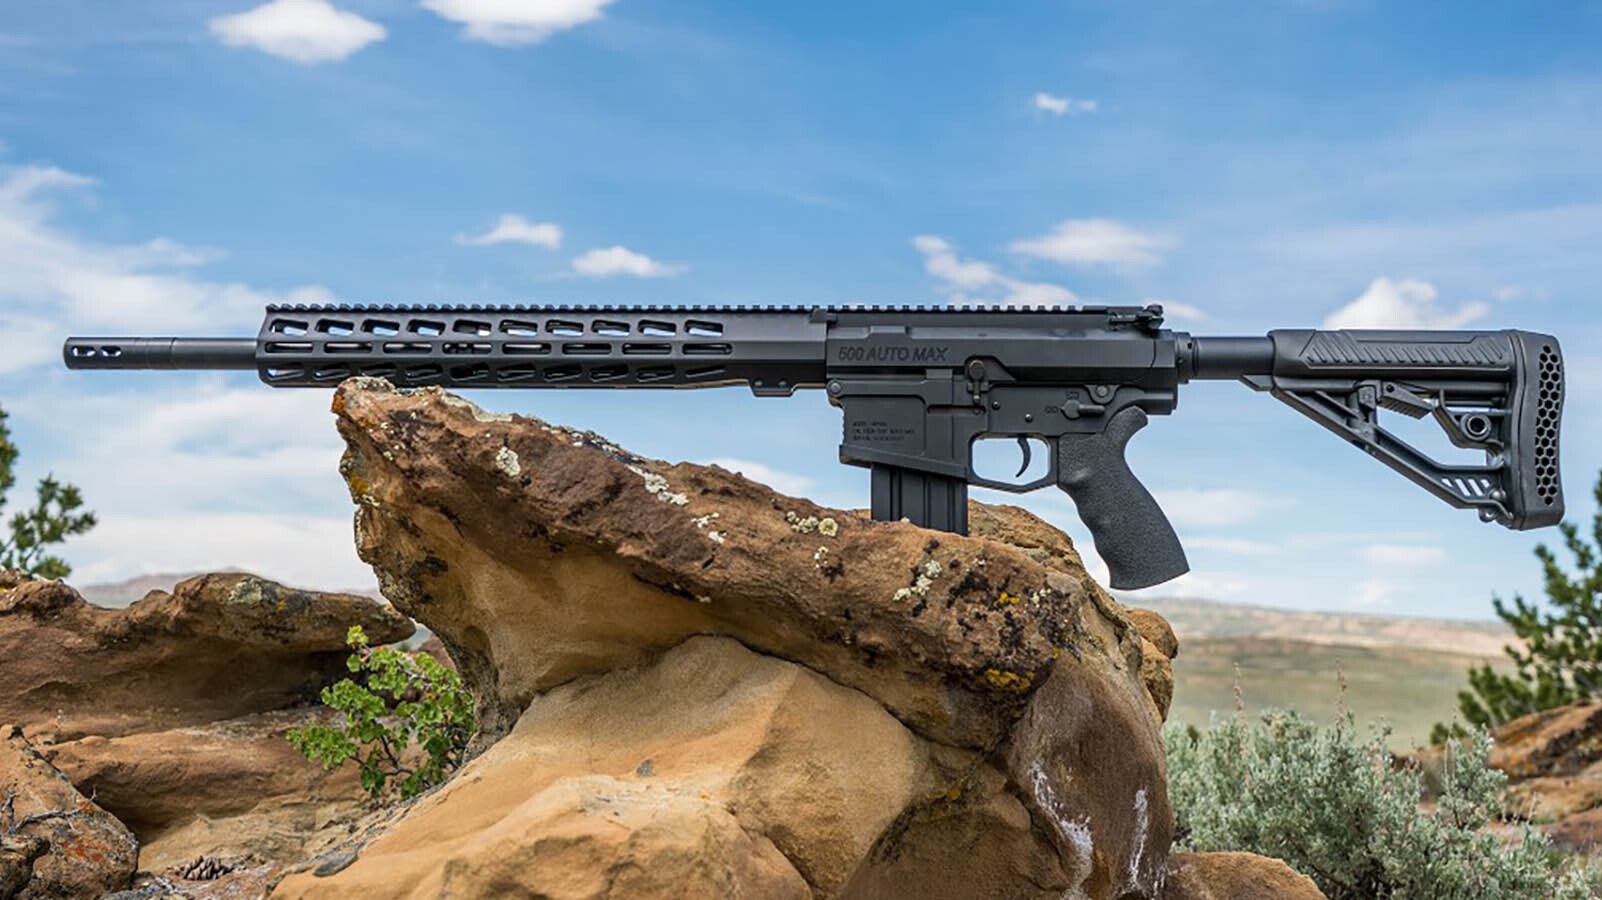 The AR500, touted as the world’s most powerful AR, is made by Big Horn Armory, Inc. in Cody and chambered for the company’s .500 Auto Max cartridge.